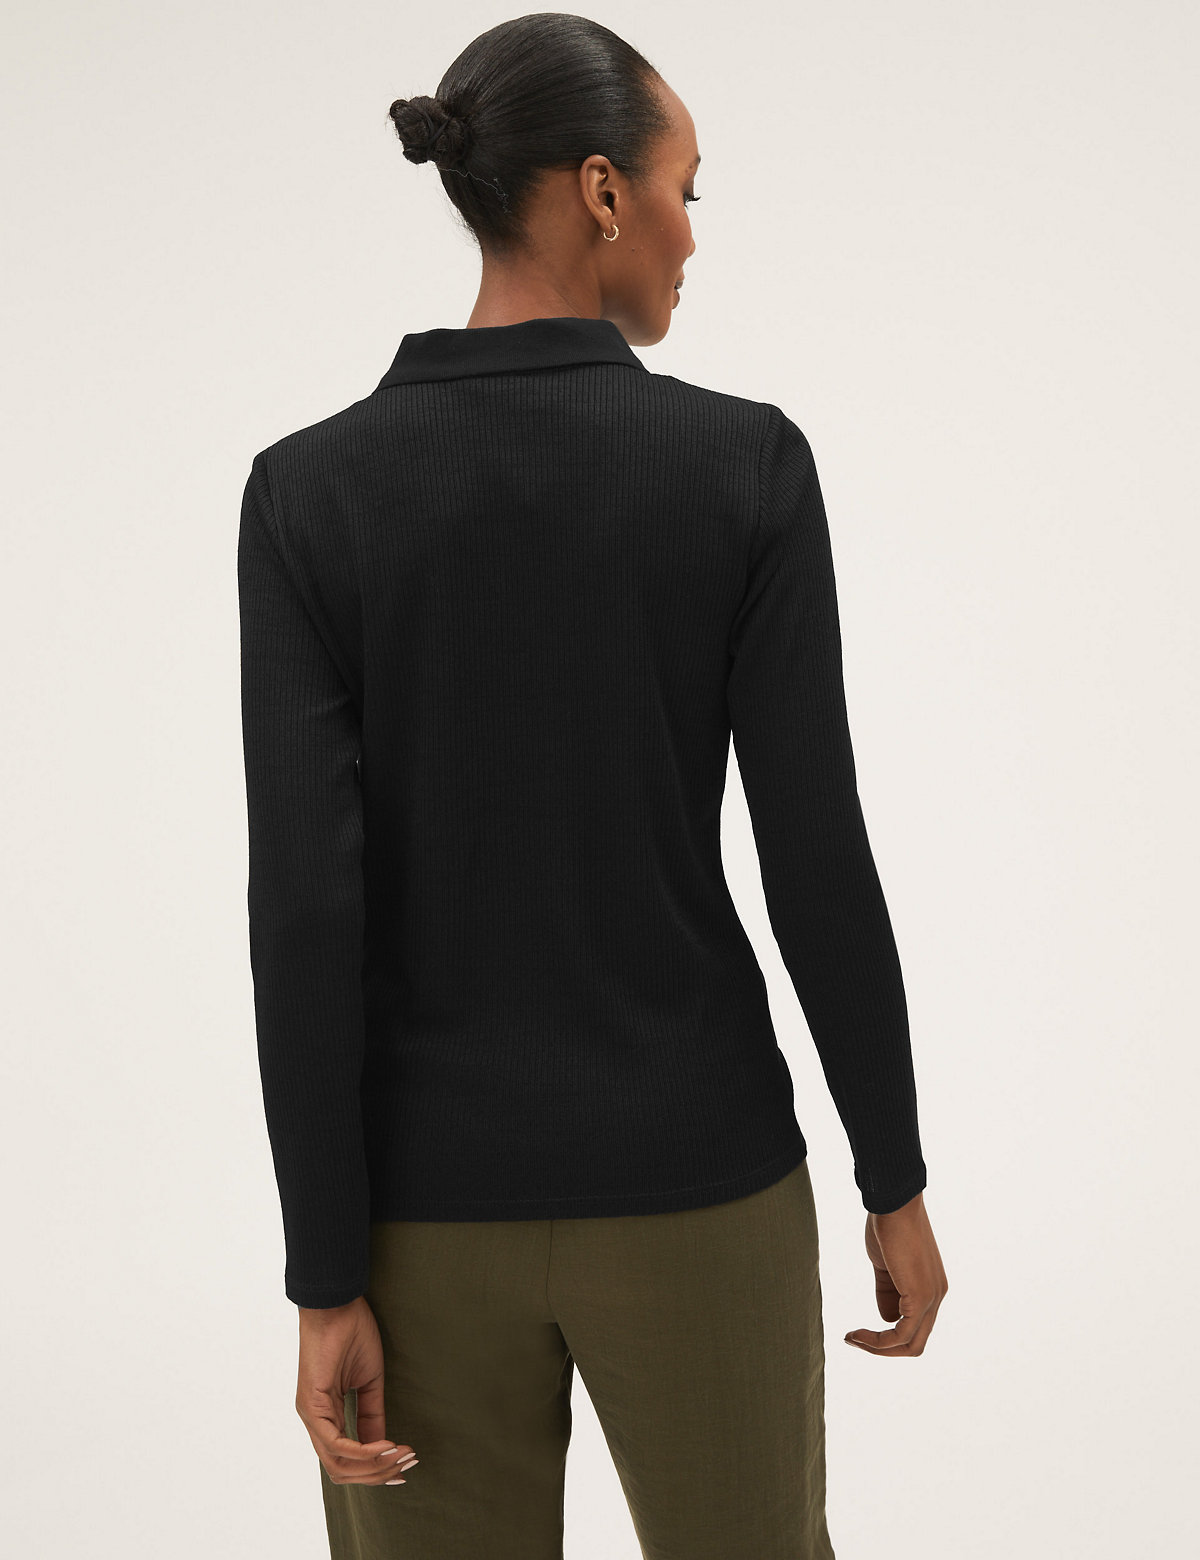 Ribbed Collared Fitted Long Sleeve Top